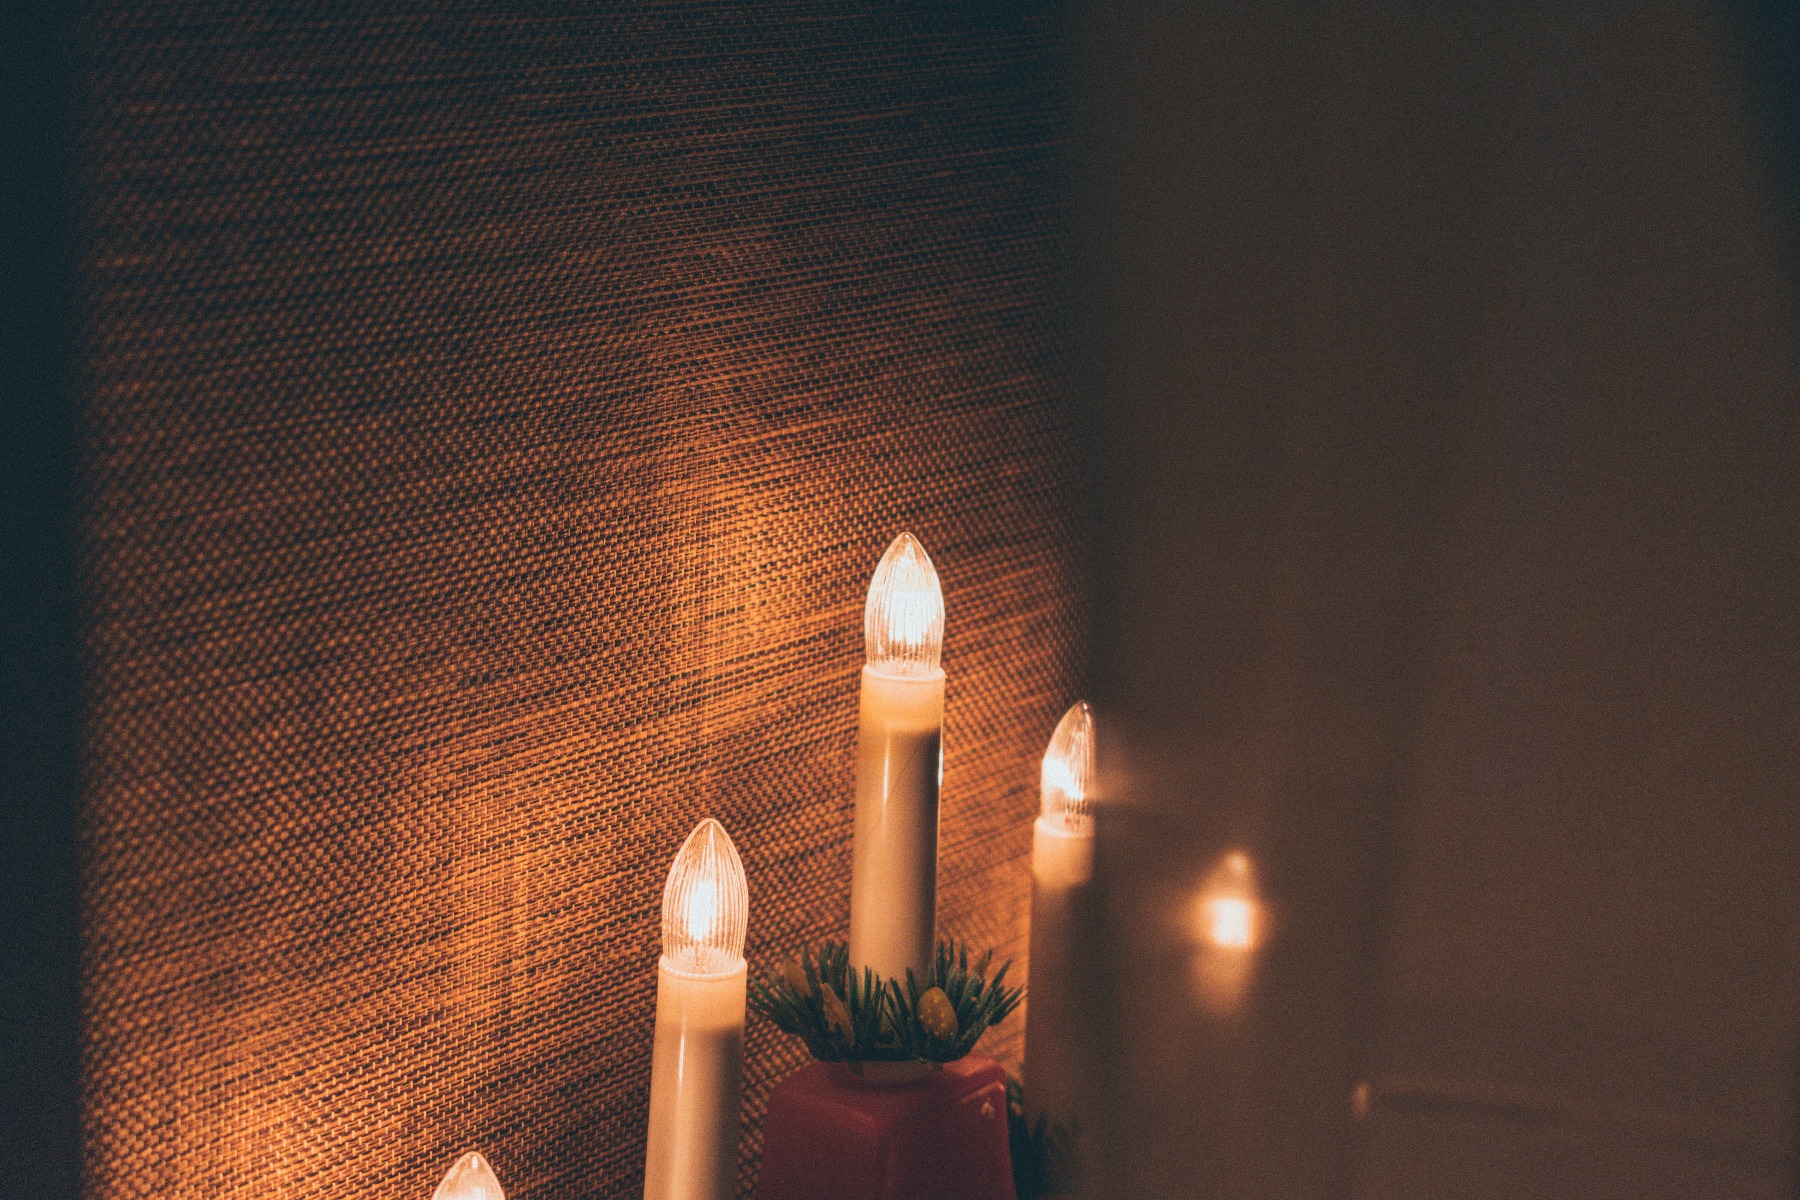 Try making your own Christmas Candle Arch this year!